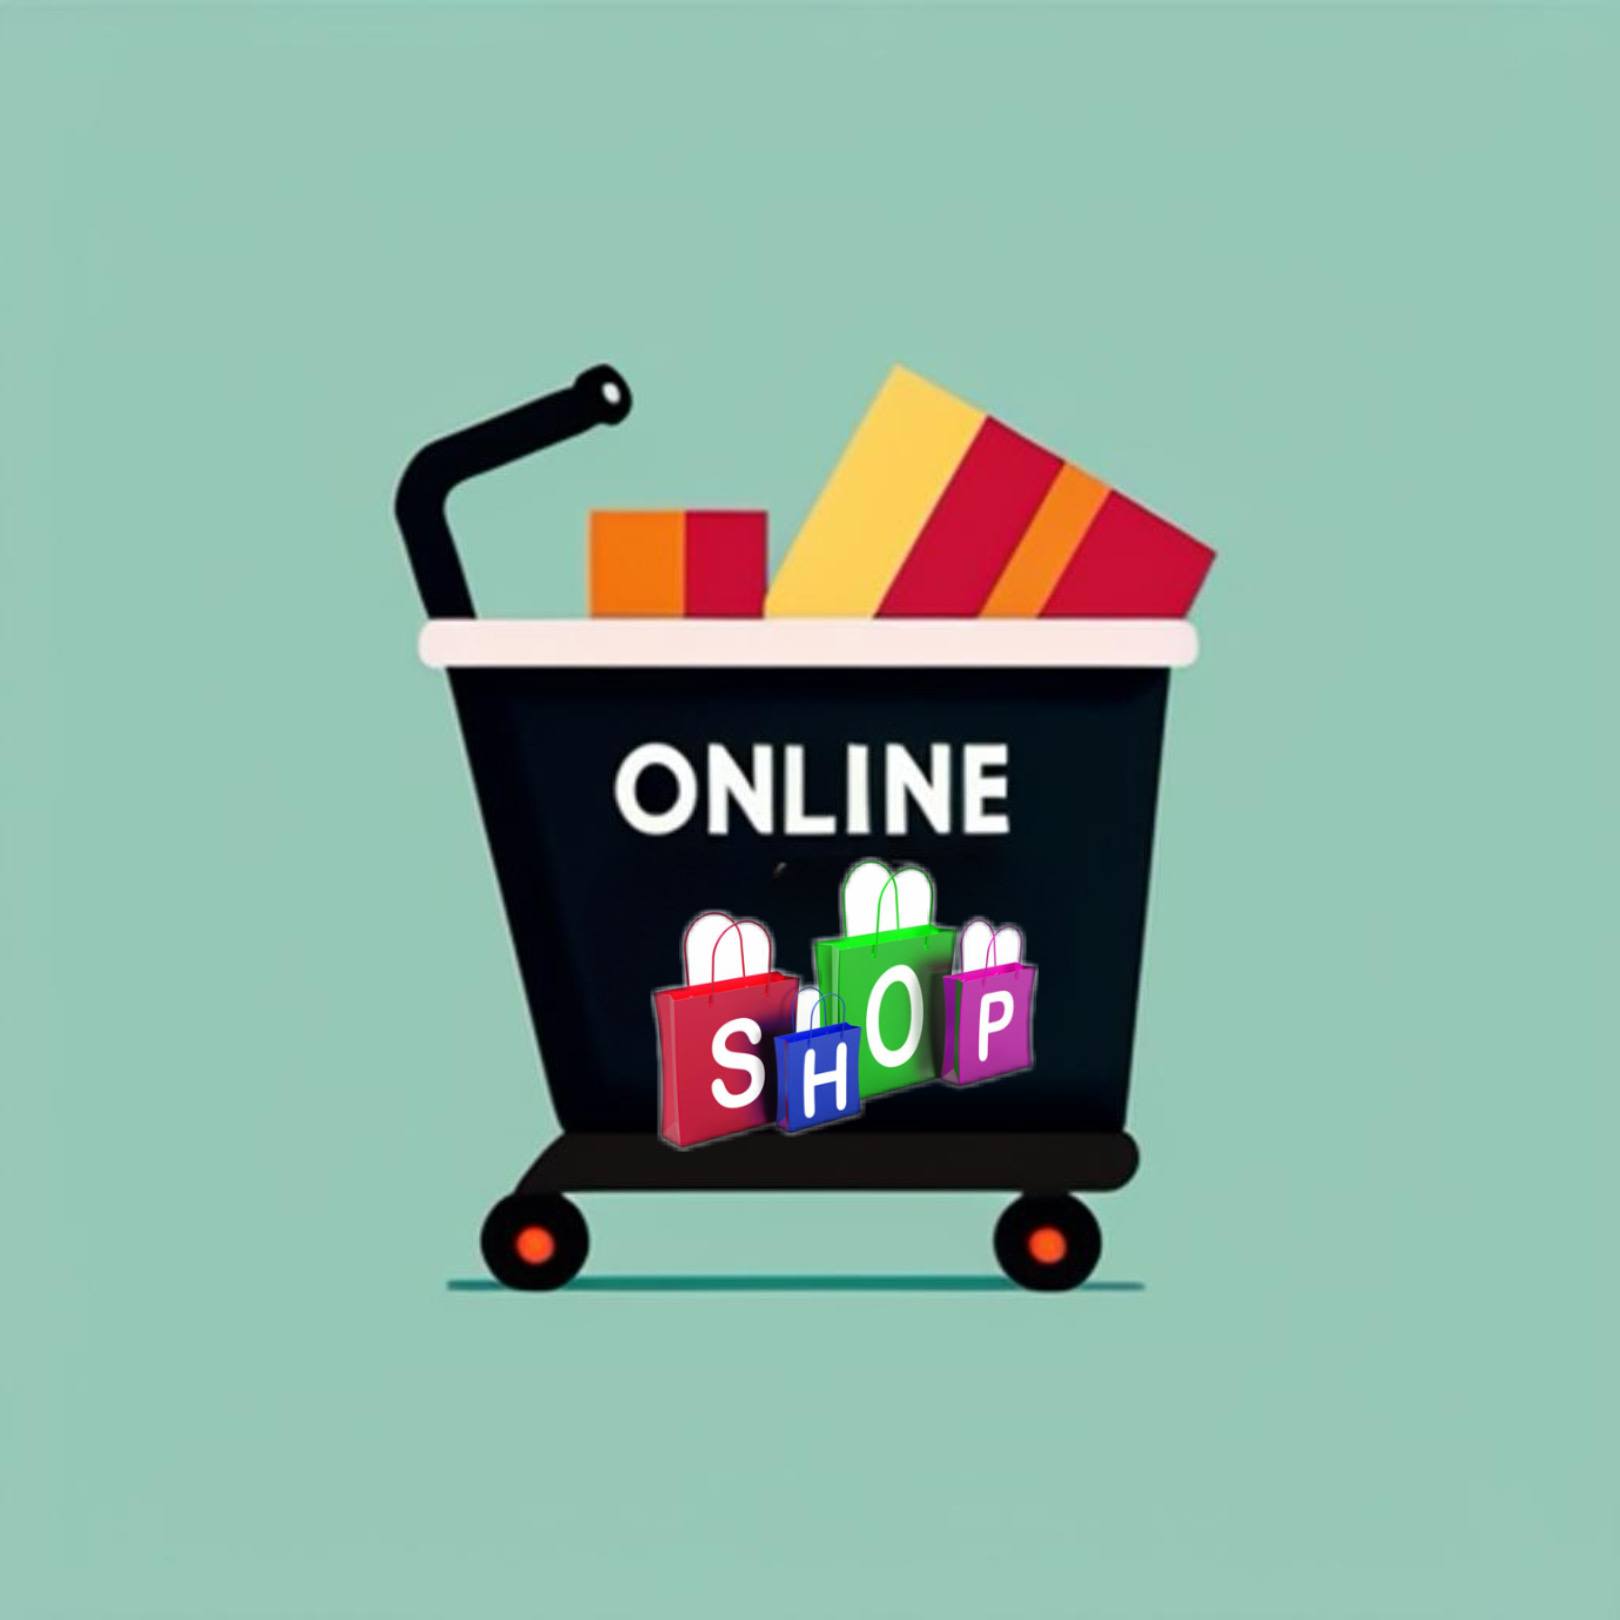 Trends online shopping